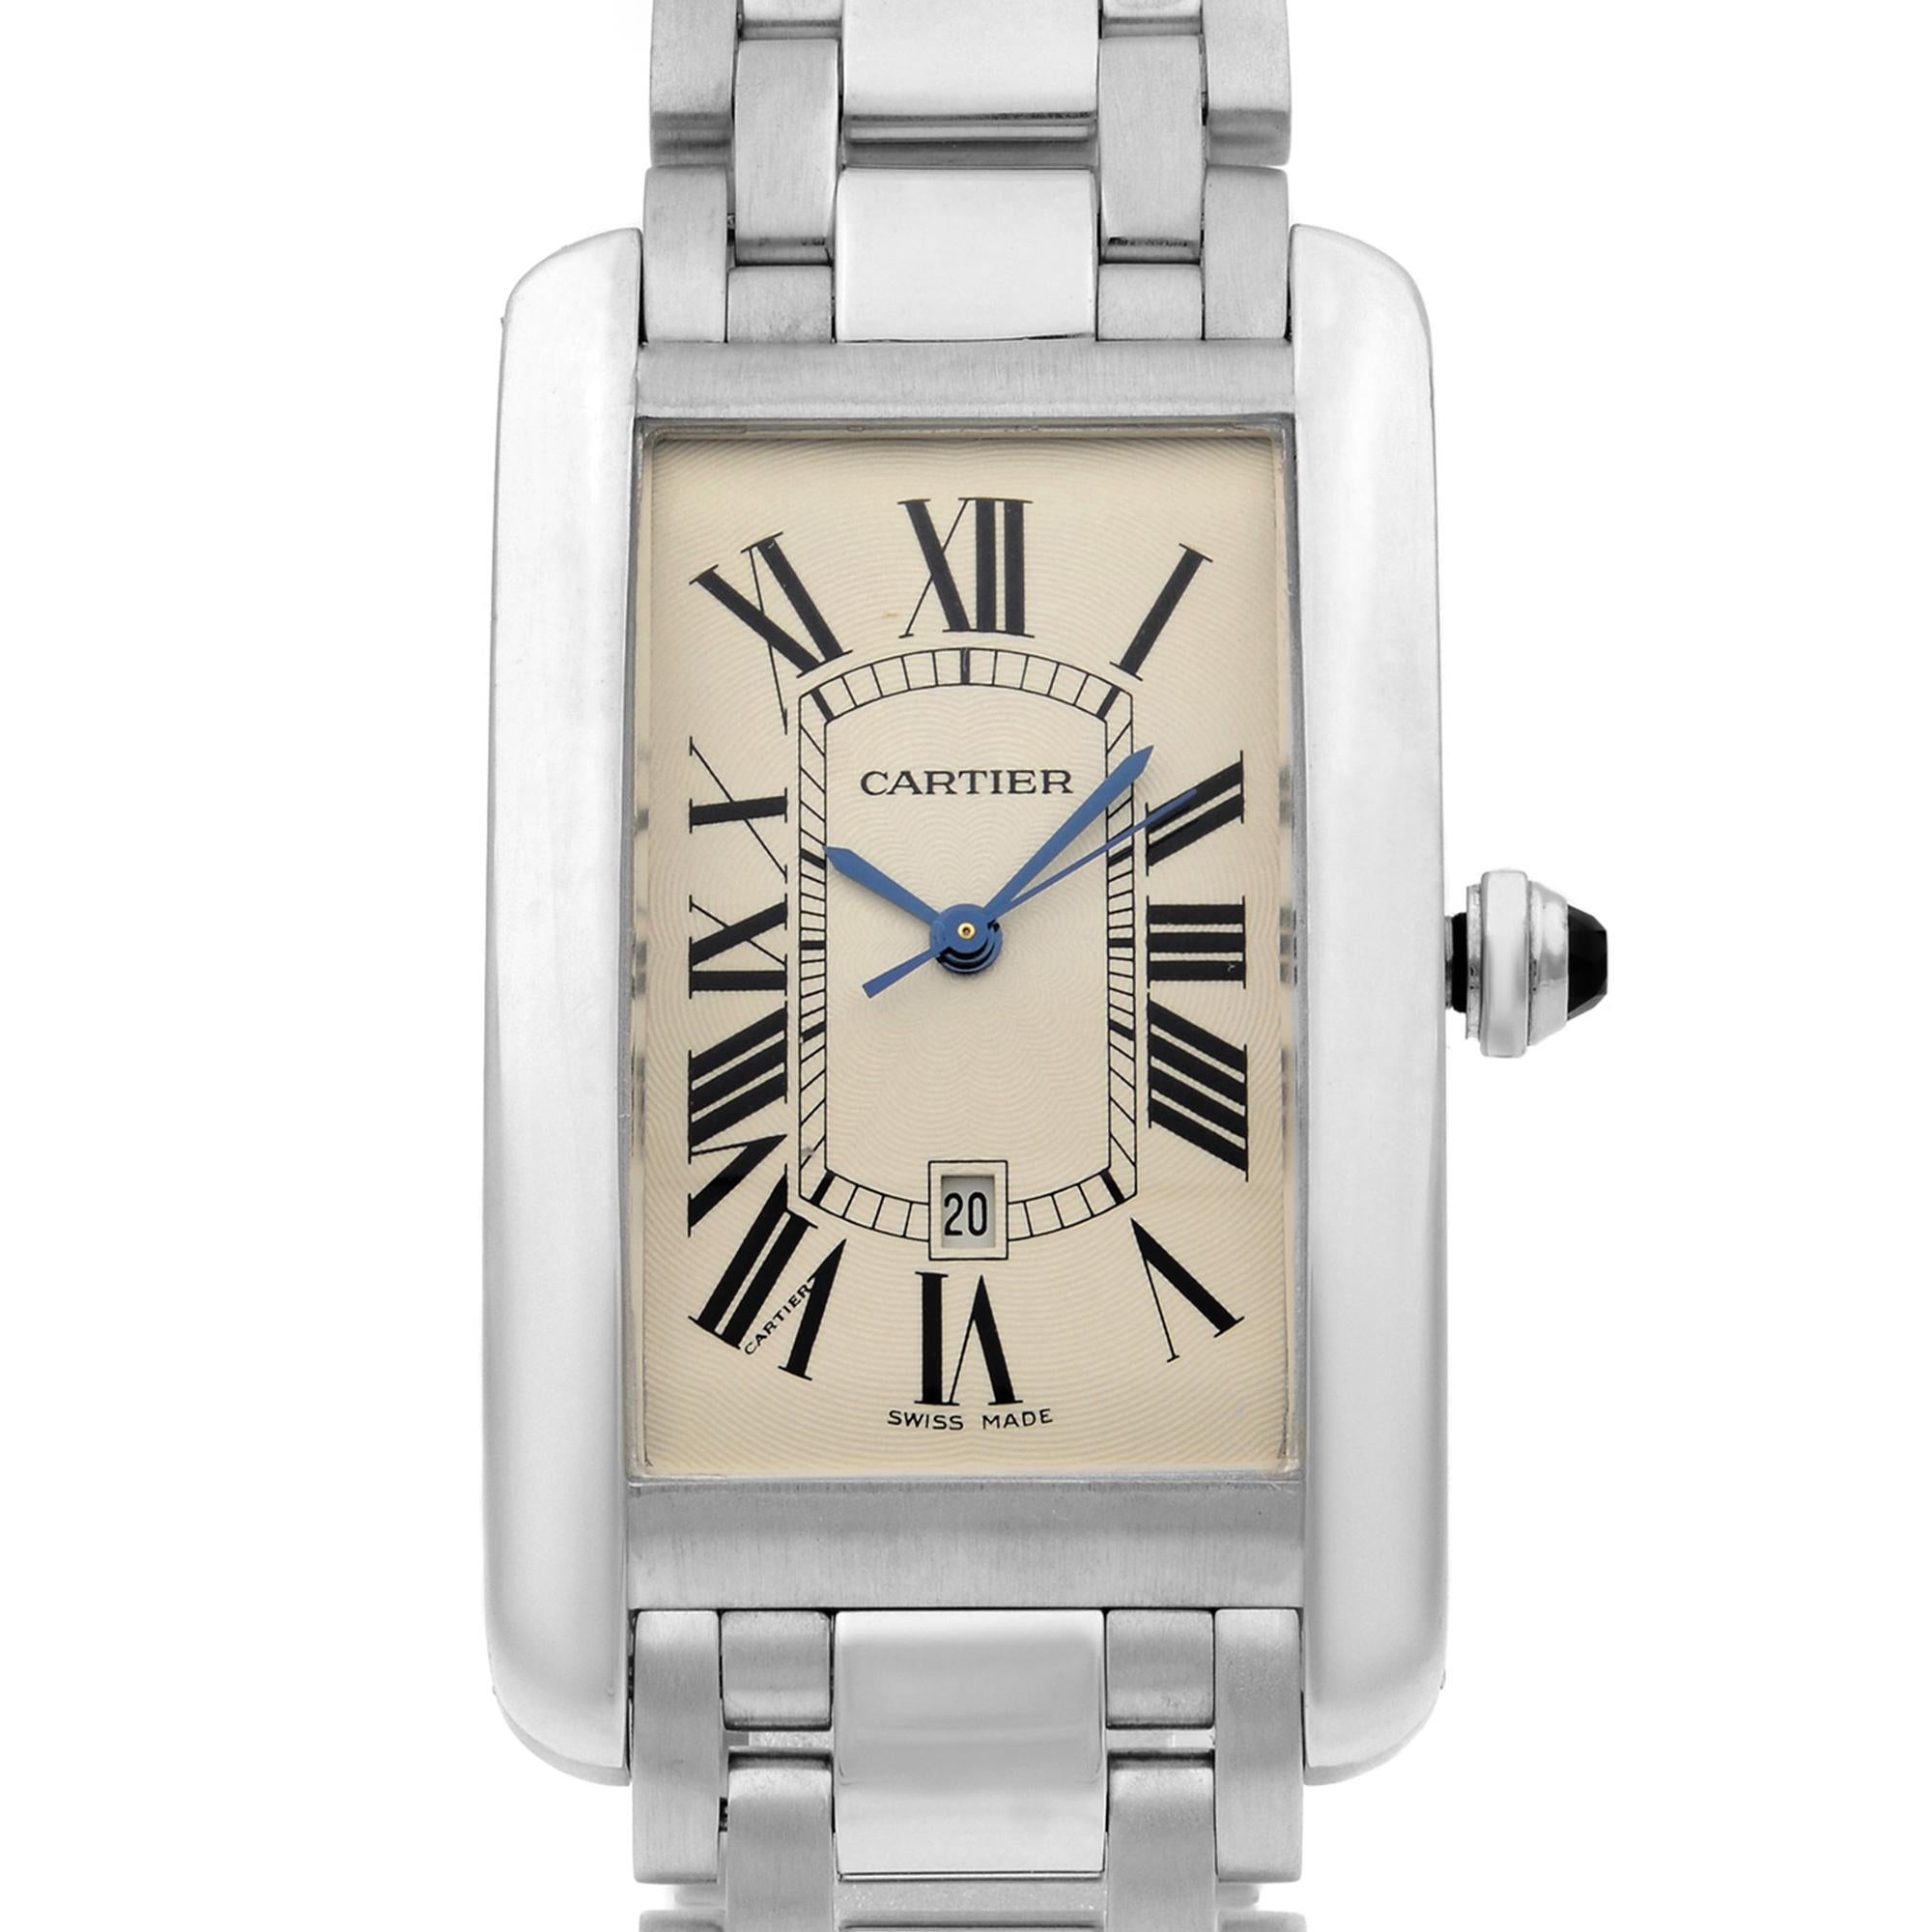 This pre-owned Cartier Tank W2605511 is a beautiful men's timepiece that is powered by mechanical (automatic) movement which is cased in a white gold case. It has a rectangle shape face, date indicator dial and has hand roman numerals style markers.